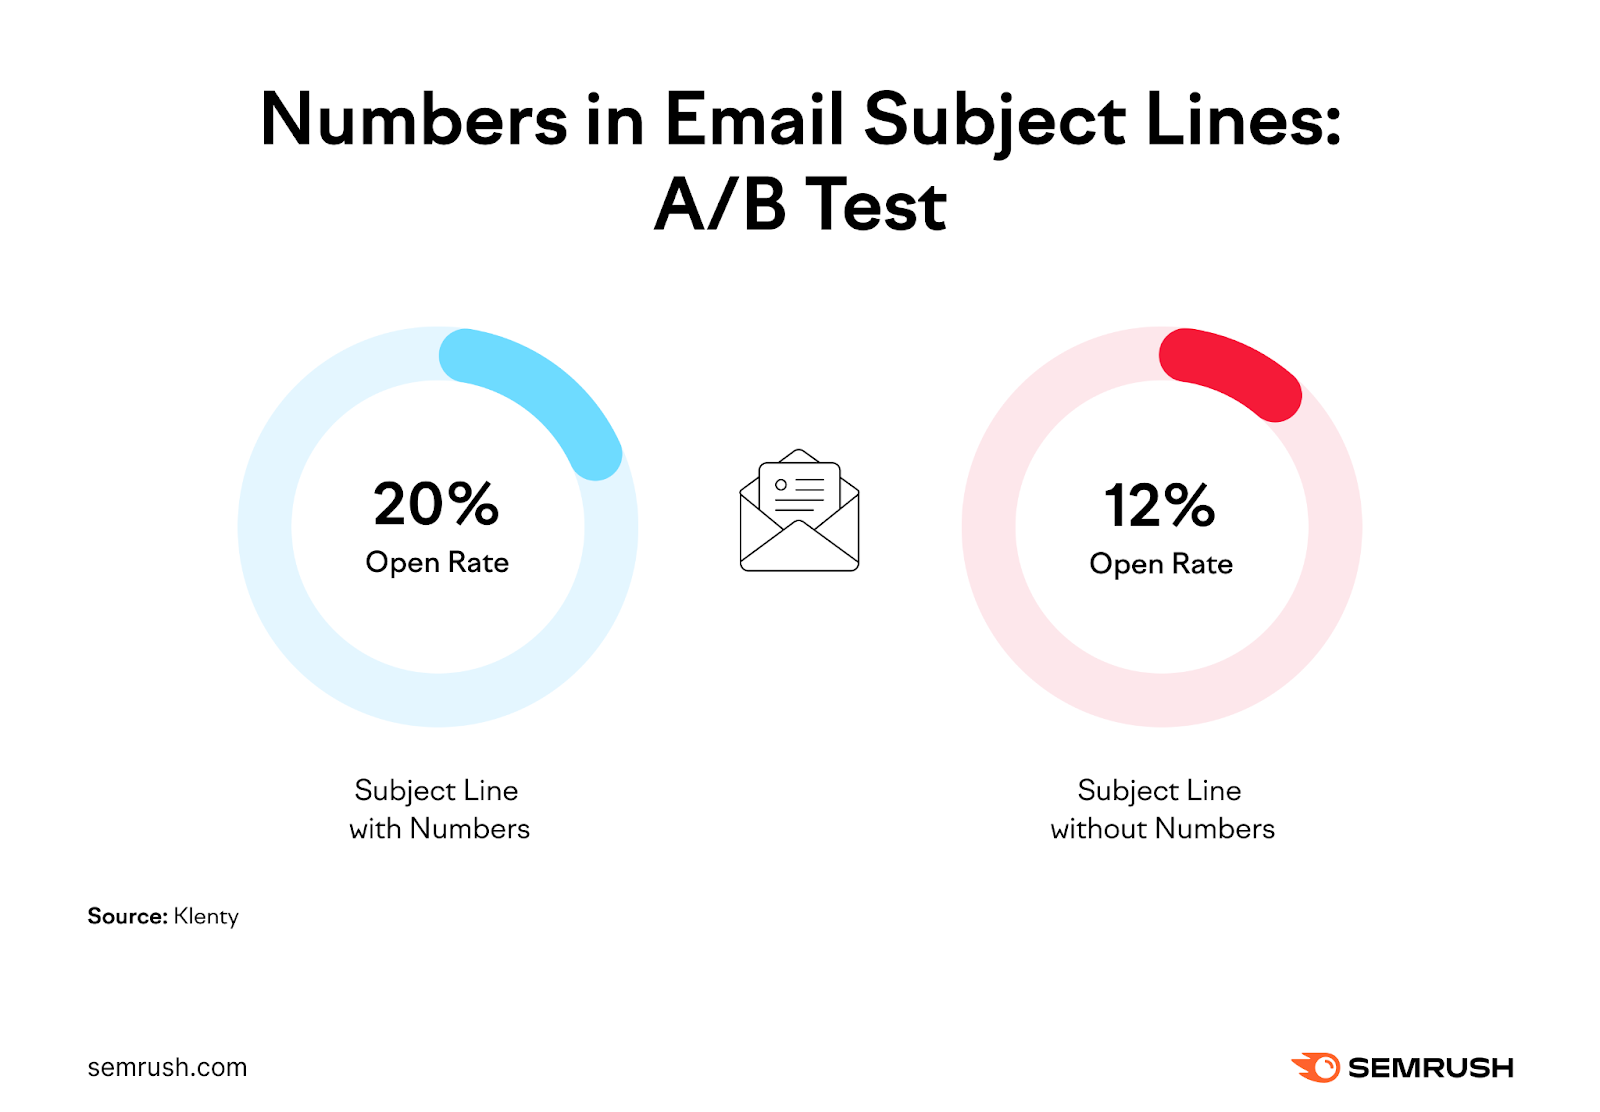 open rates are greater when email subject lines contain numbers